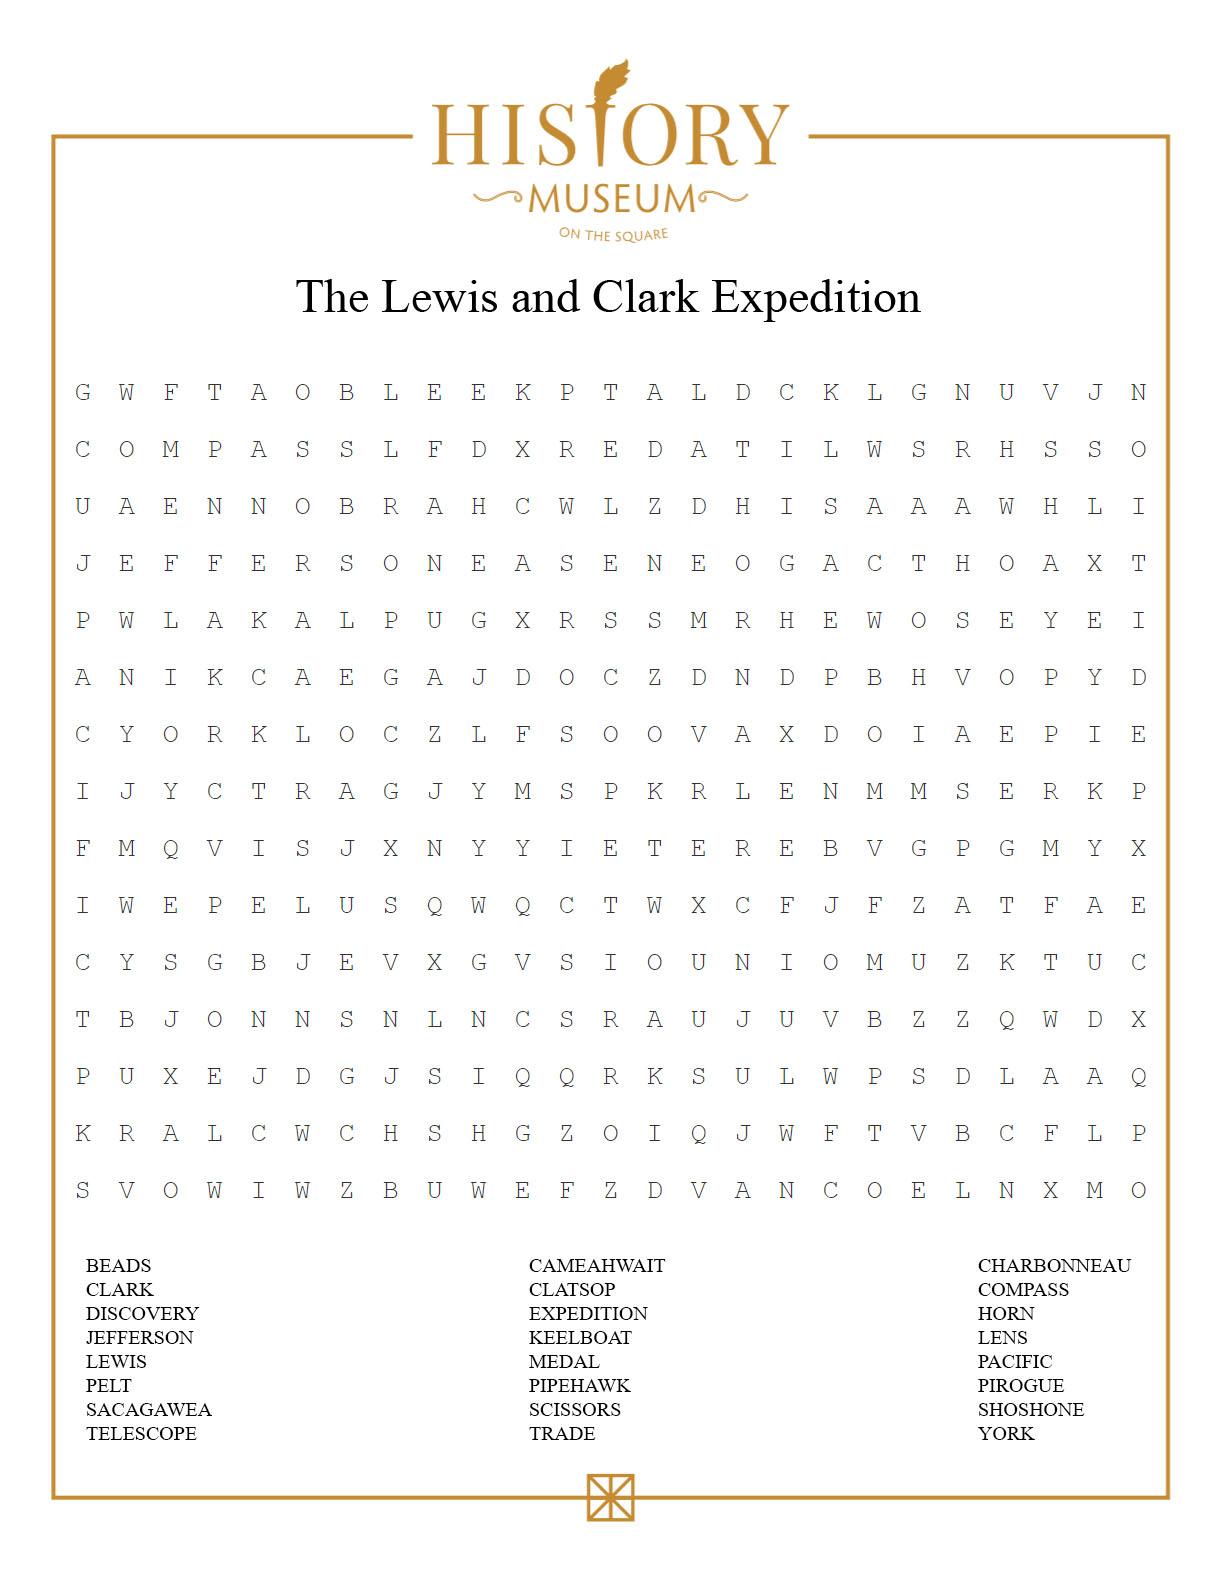 Lewis and Clark Word Search